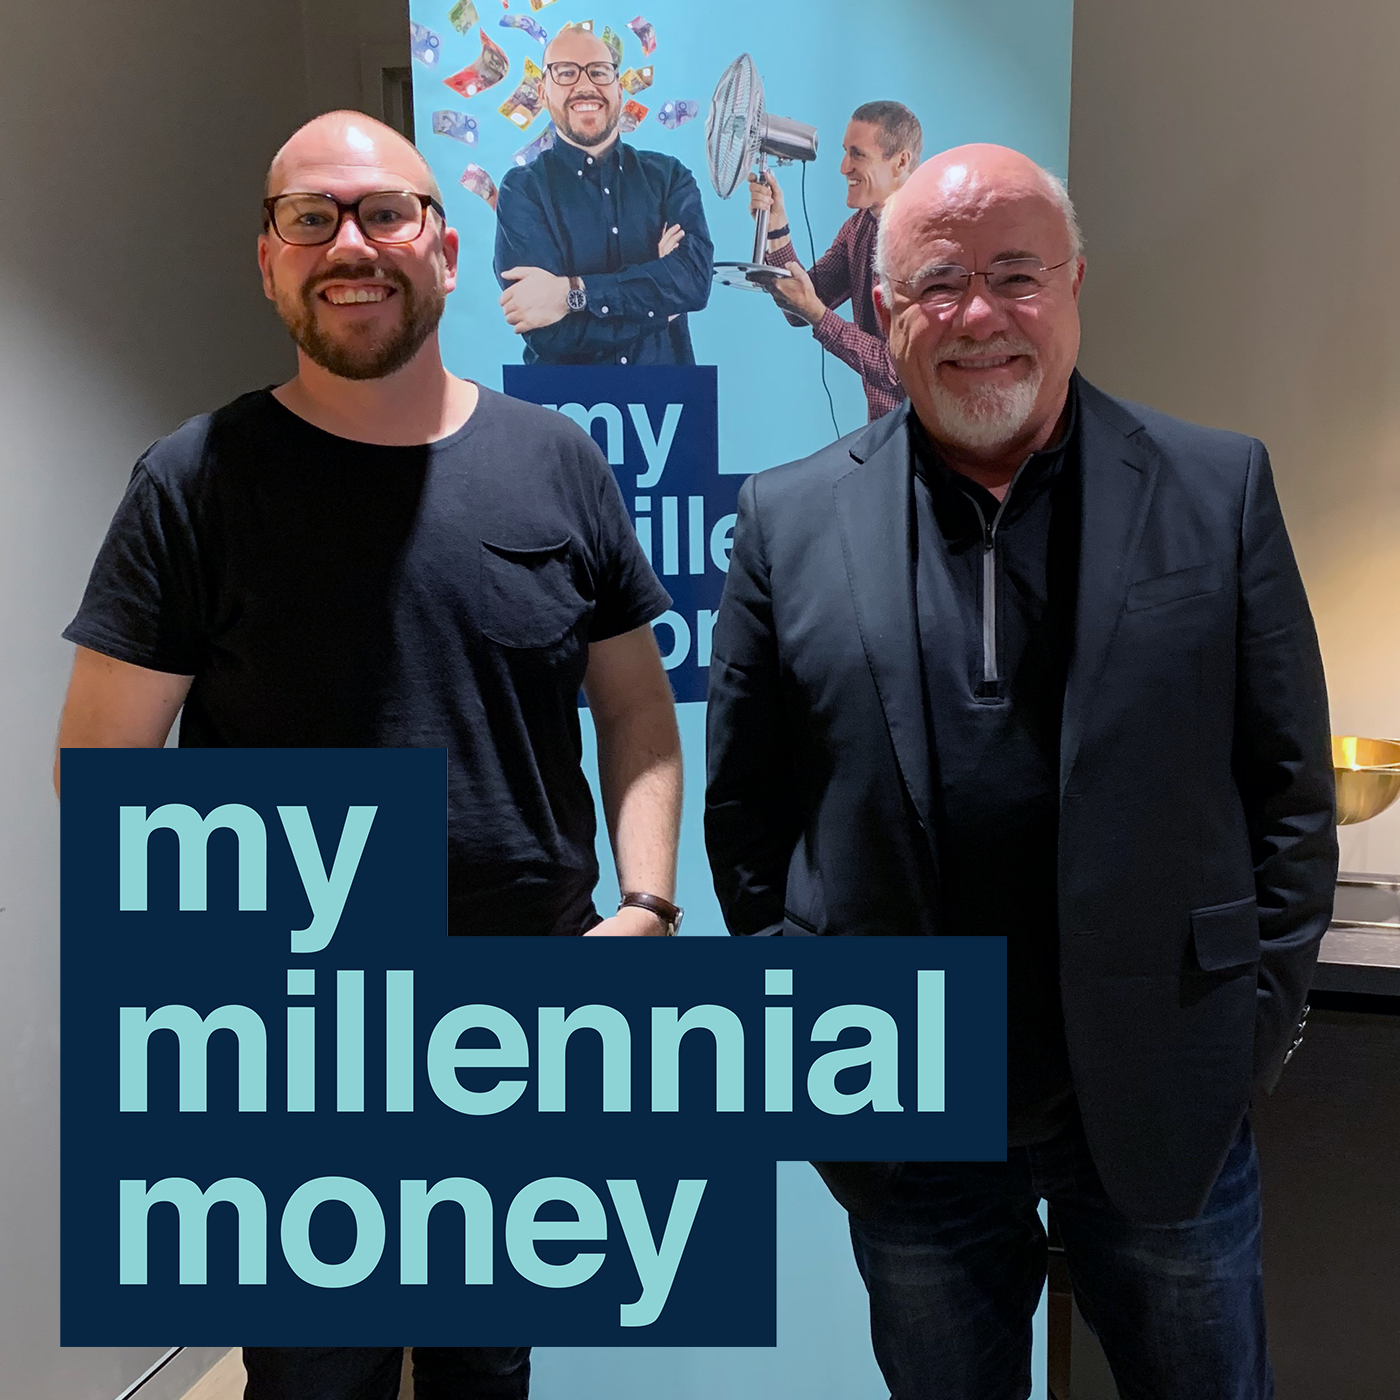 306 Dave Ramsey from The Dave Ramsey Show